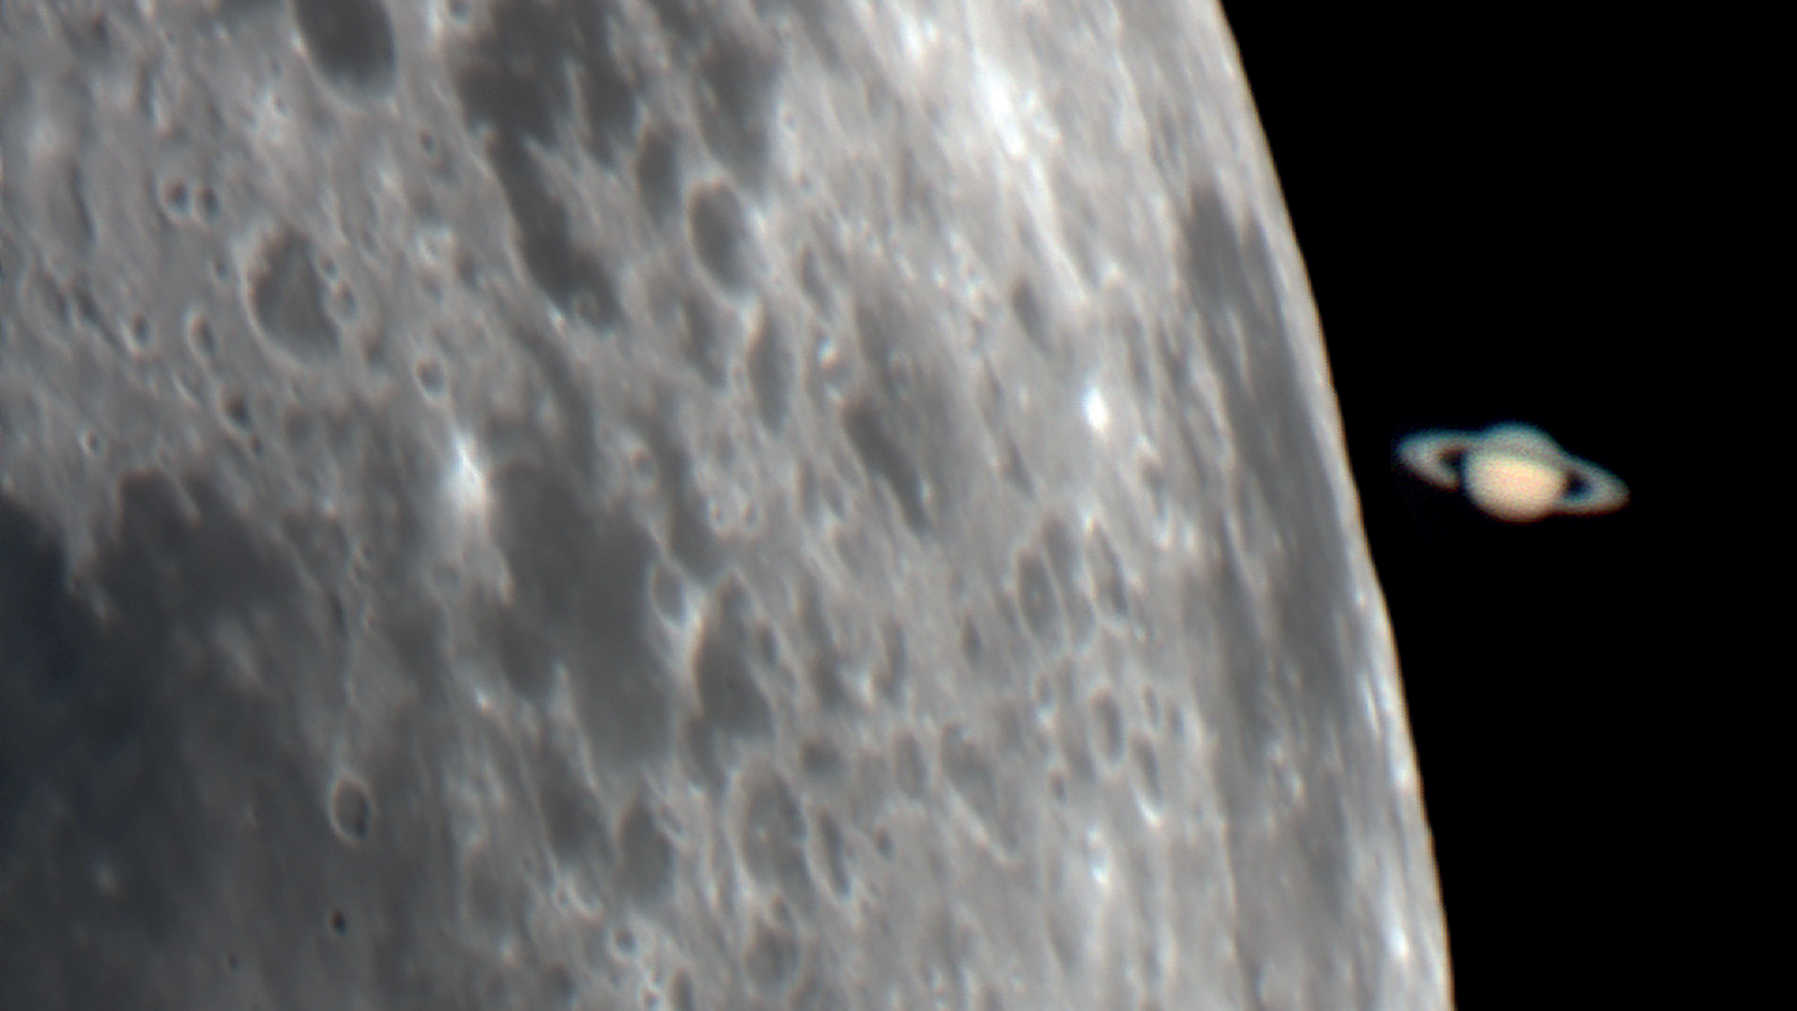 Occultation of the planet Saturn by the Moon on 22.5.2007. Captured with an uncooled CCD camera on a Schmidt Cassegrain telescope with 200mm aperture and a 2,000mm focal length. U. Dittler